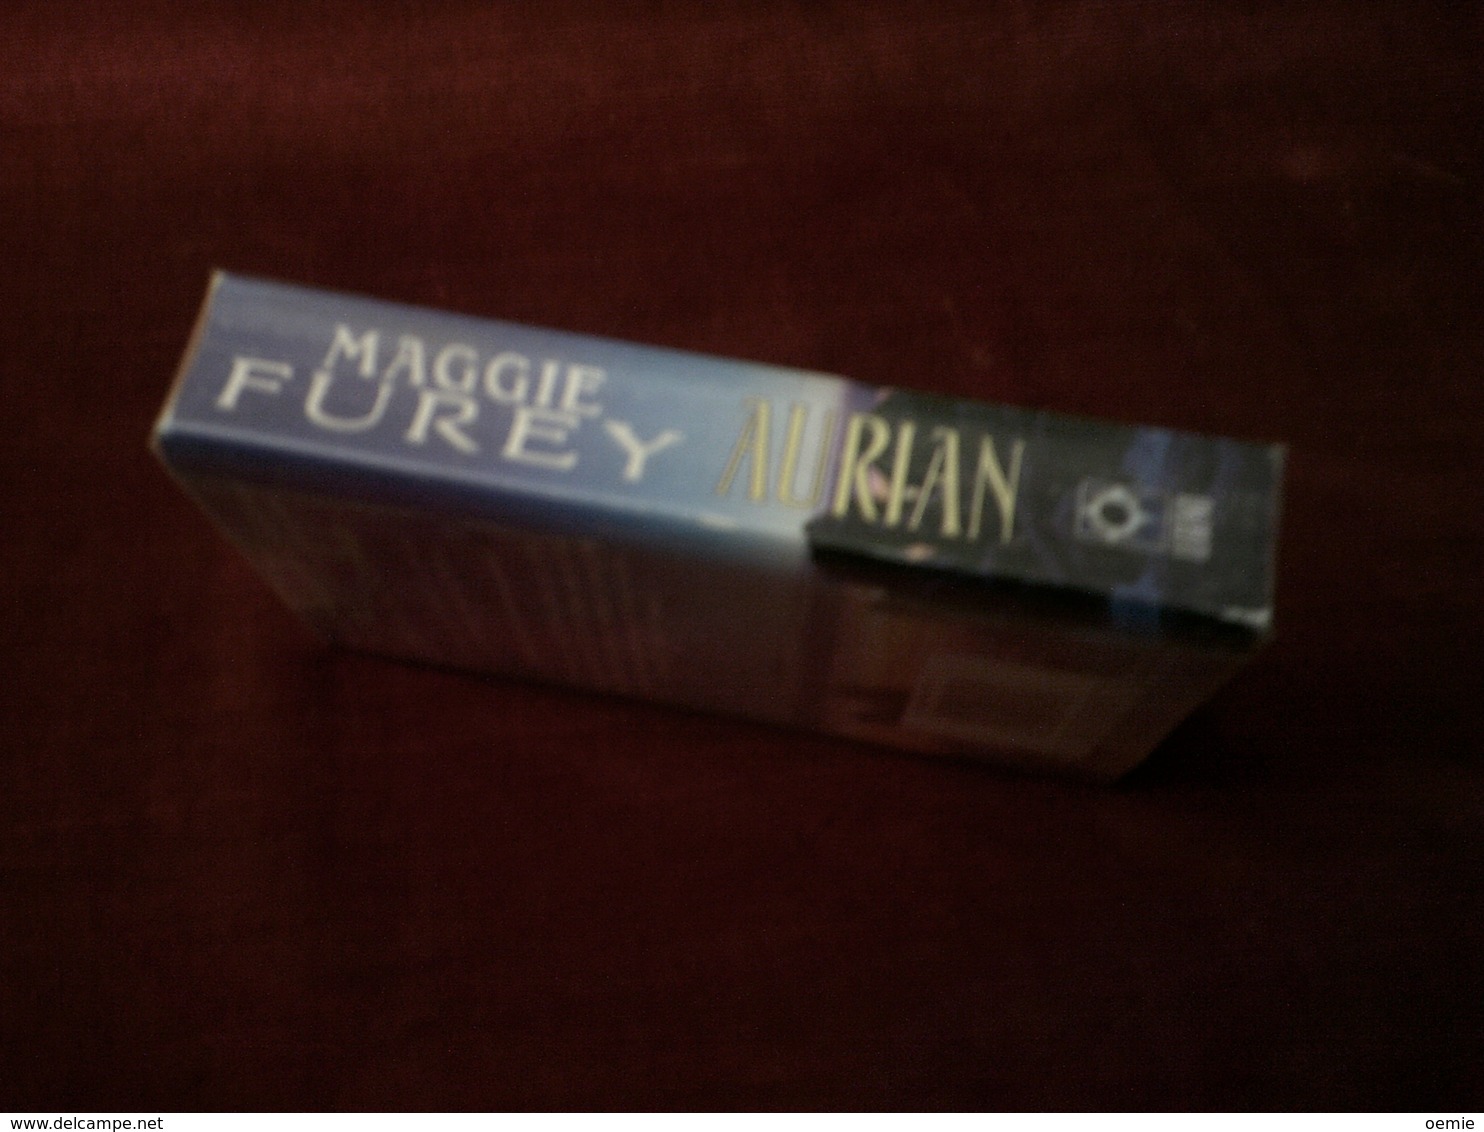 MAGGIE  FUREY  AURIAN  ° BOOK ONE THE ARTEFACTS OF POWER - Science Fiction